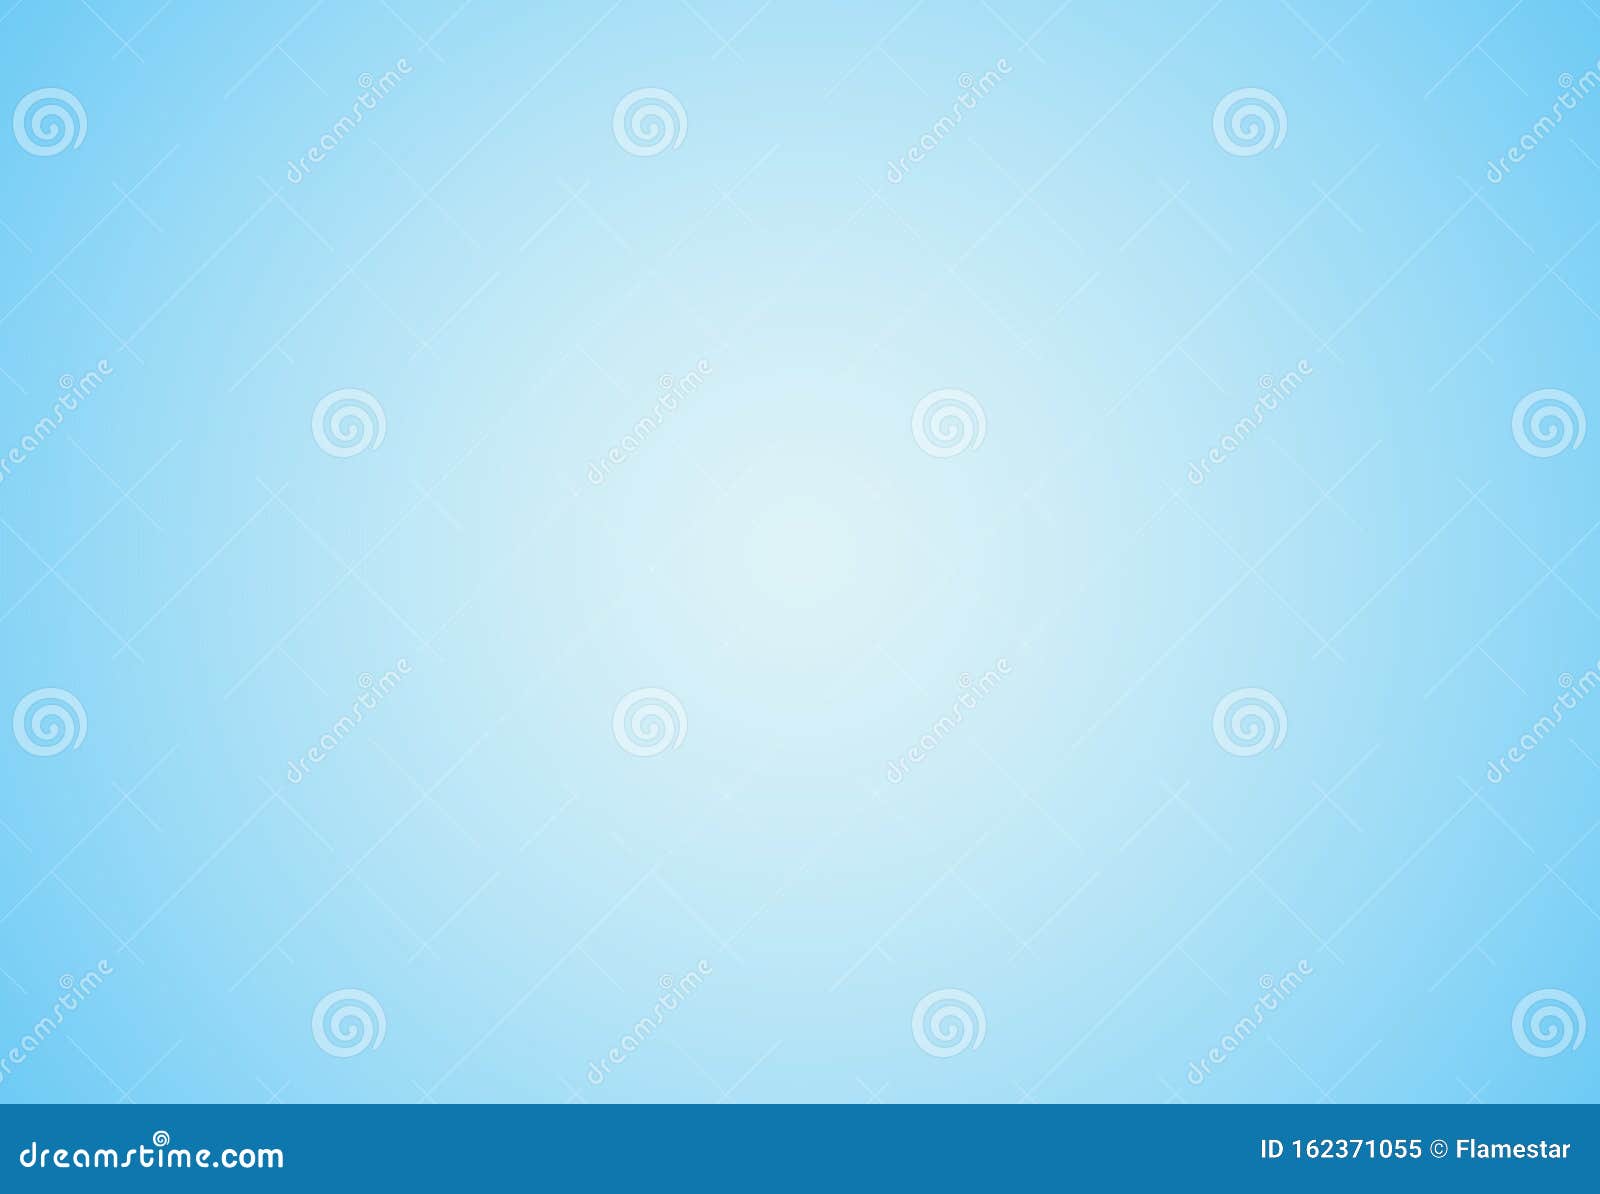 Sky-blue Gradient Background for Advertisers. Gradient HQ Wallpaper Stock  Vector - Illustration of energy, blue: 162371055